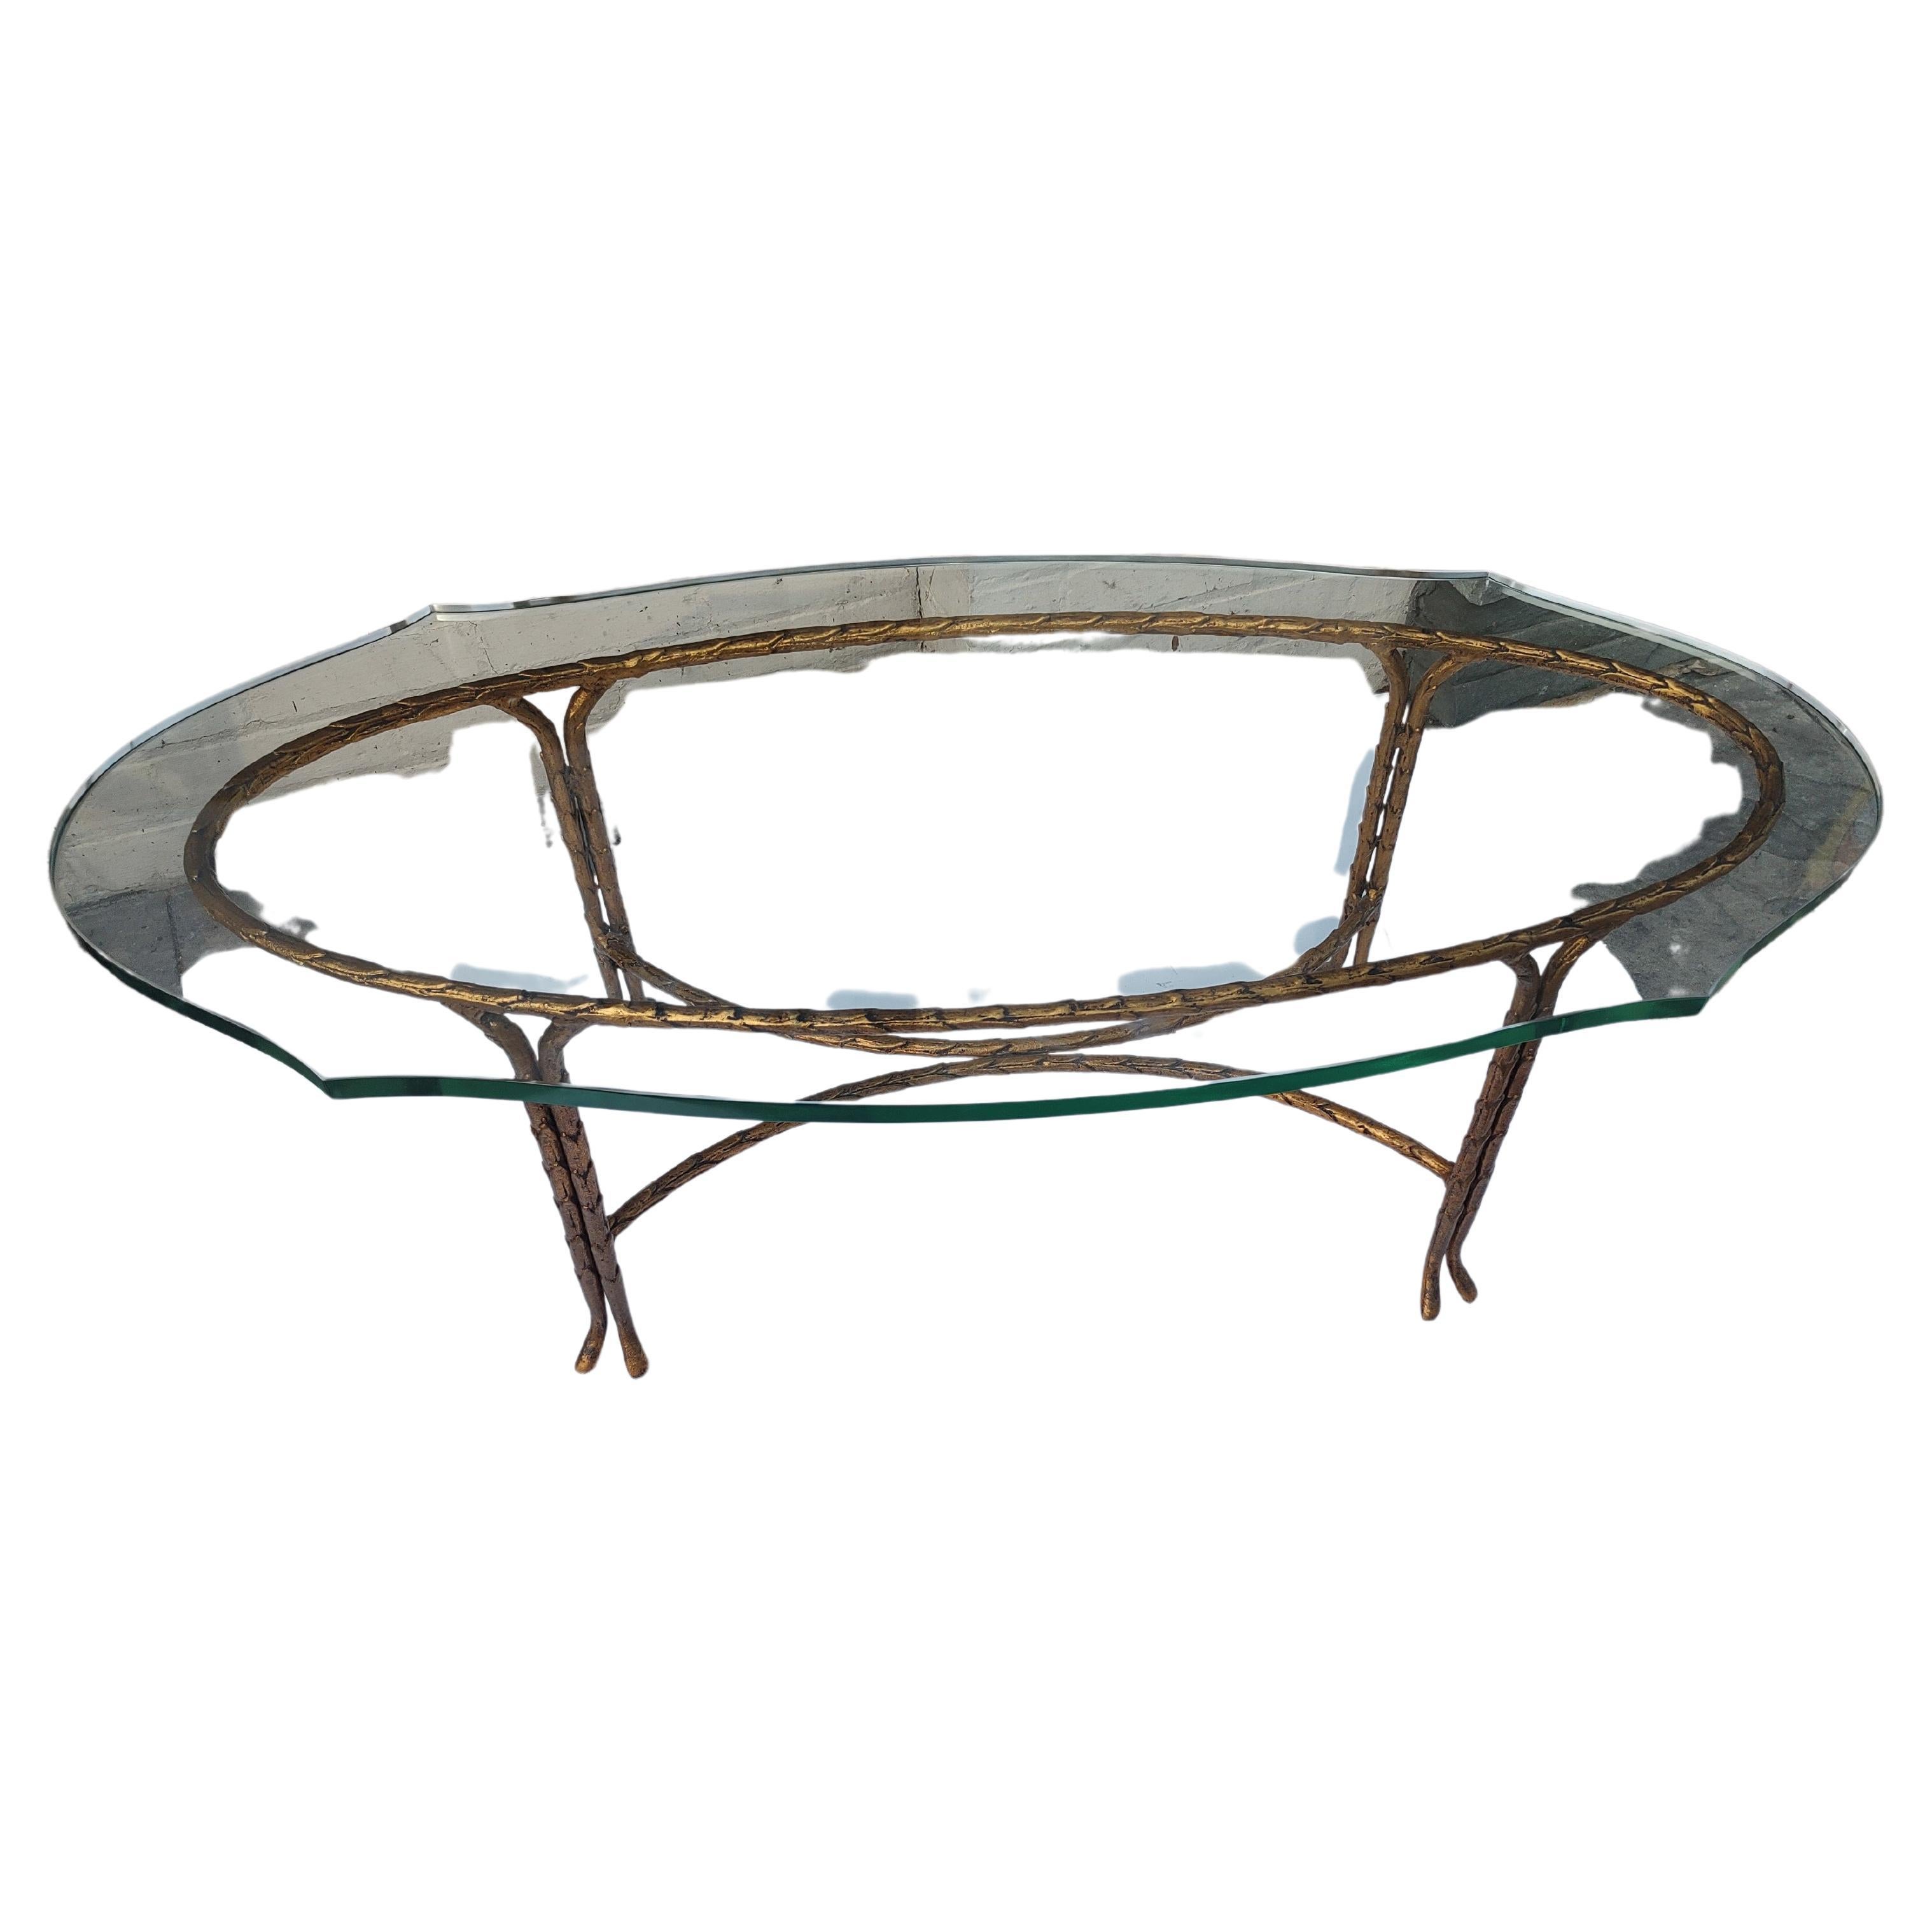 Fabulous simple and elegant organic style Gilt iron in the form of leaves on branches. Beautiful table attributed to Maison Bagues, high quality. Turtle top thick dimensional glass. Glass has some scratches but is chip free. 48 x 22 x 16h. Minor